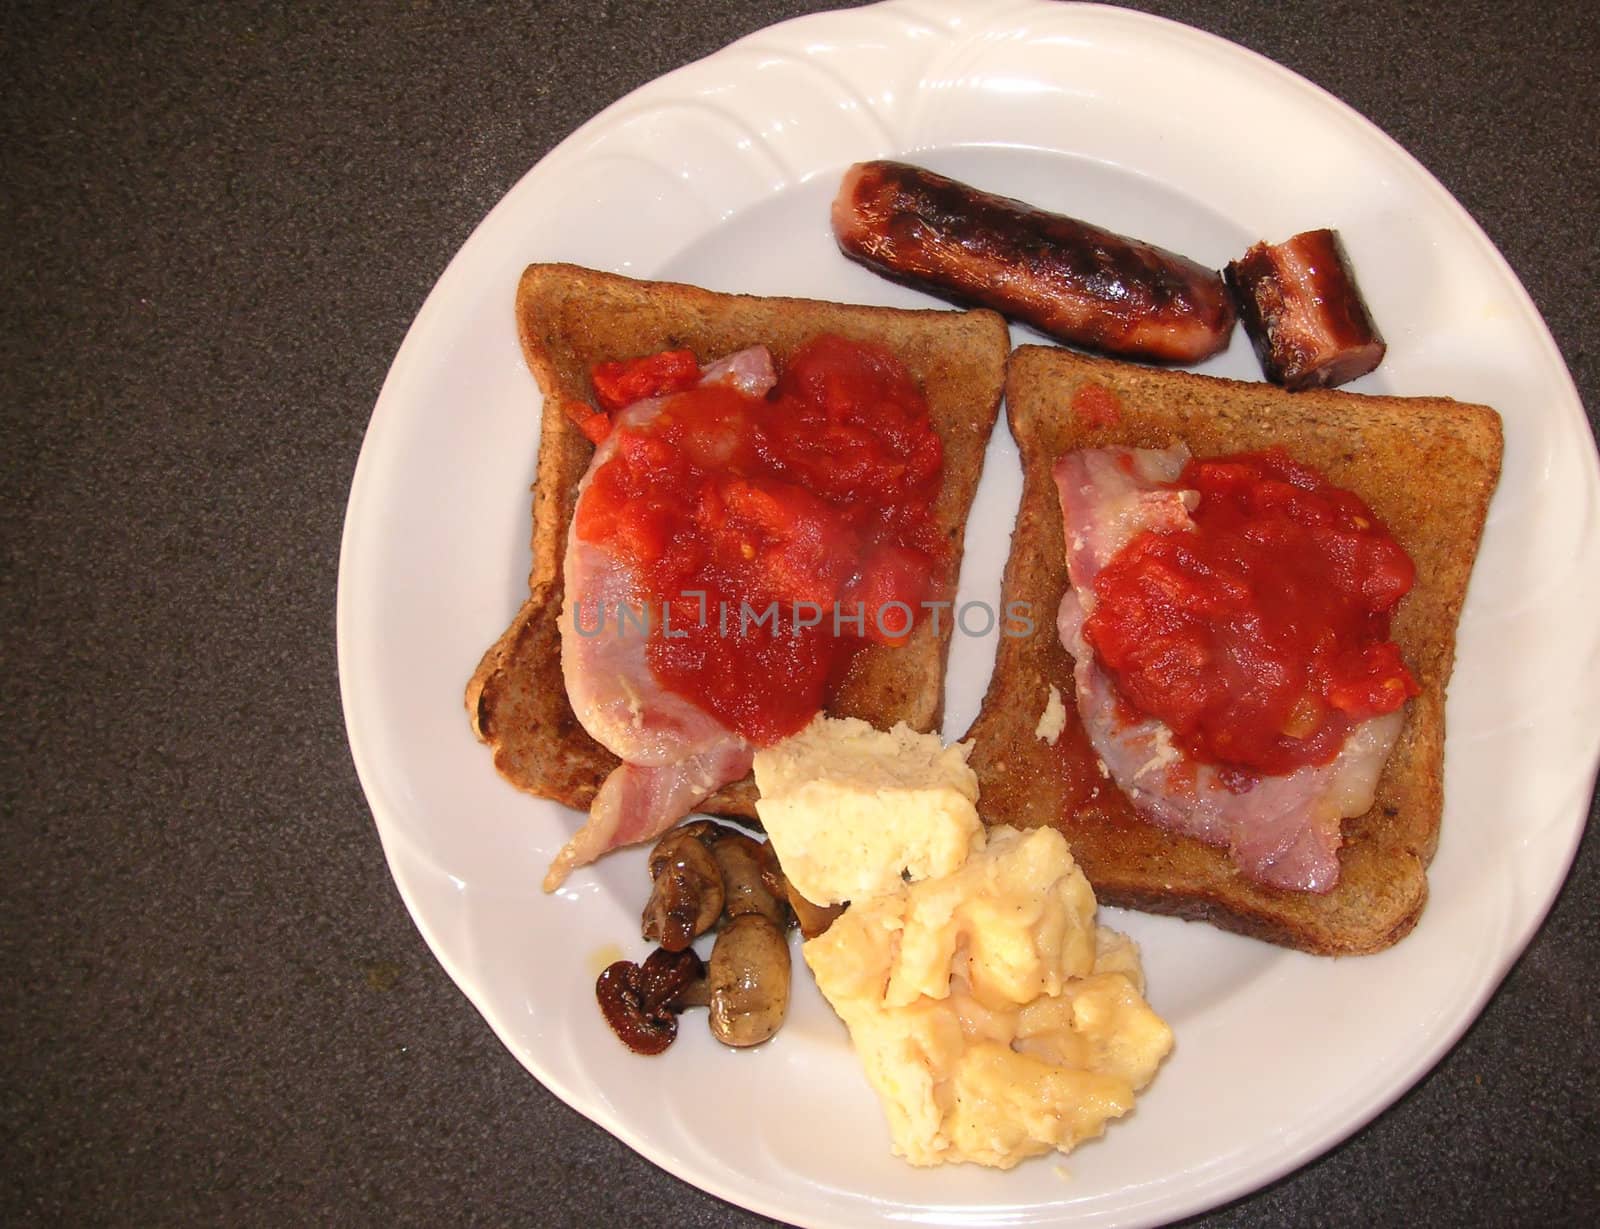 cooked breakfast on two slices of wholemeal bread